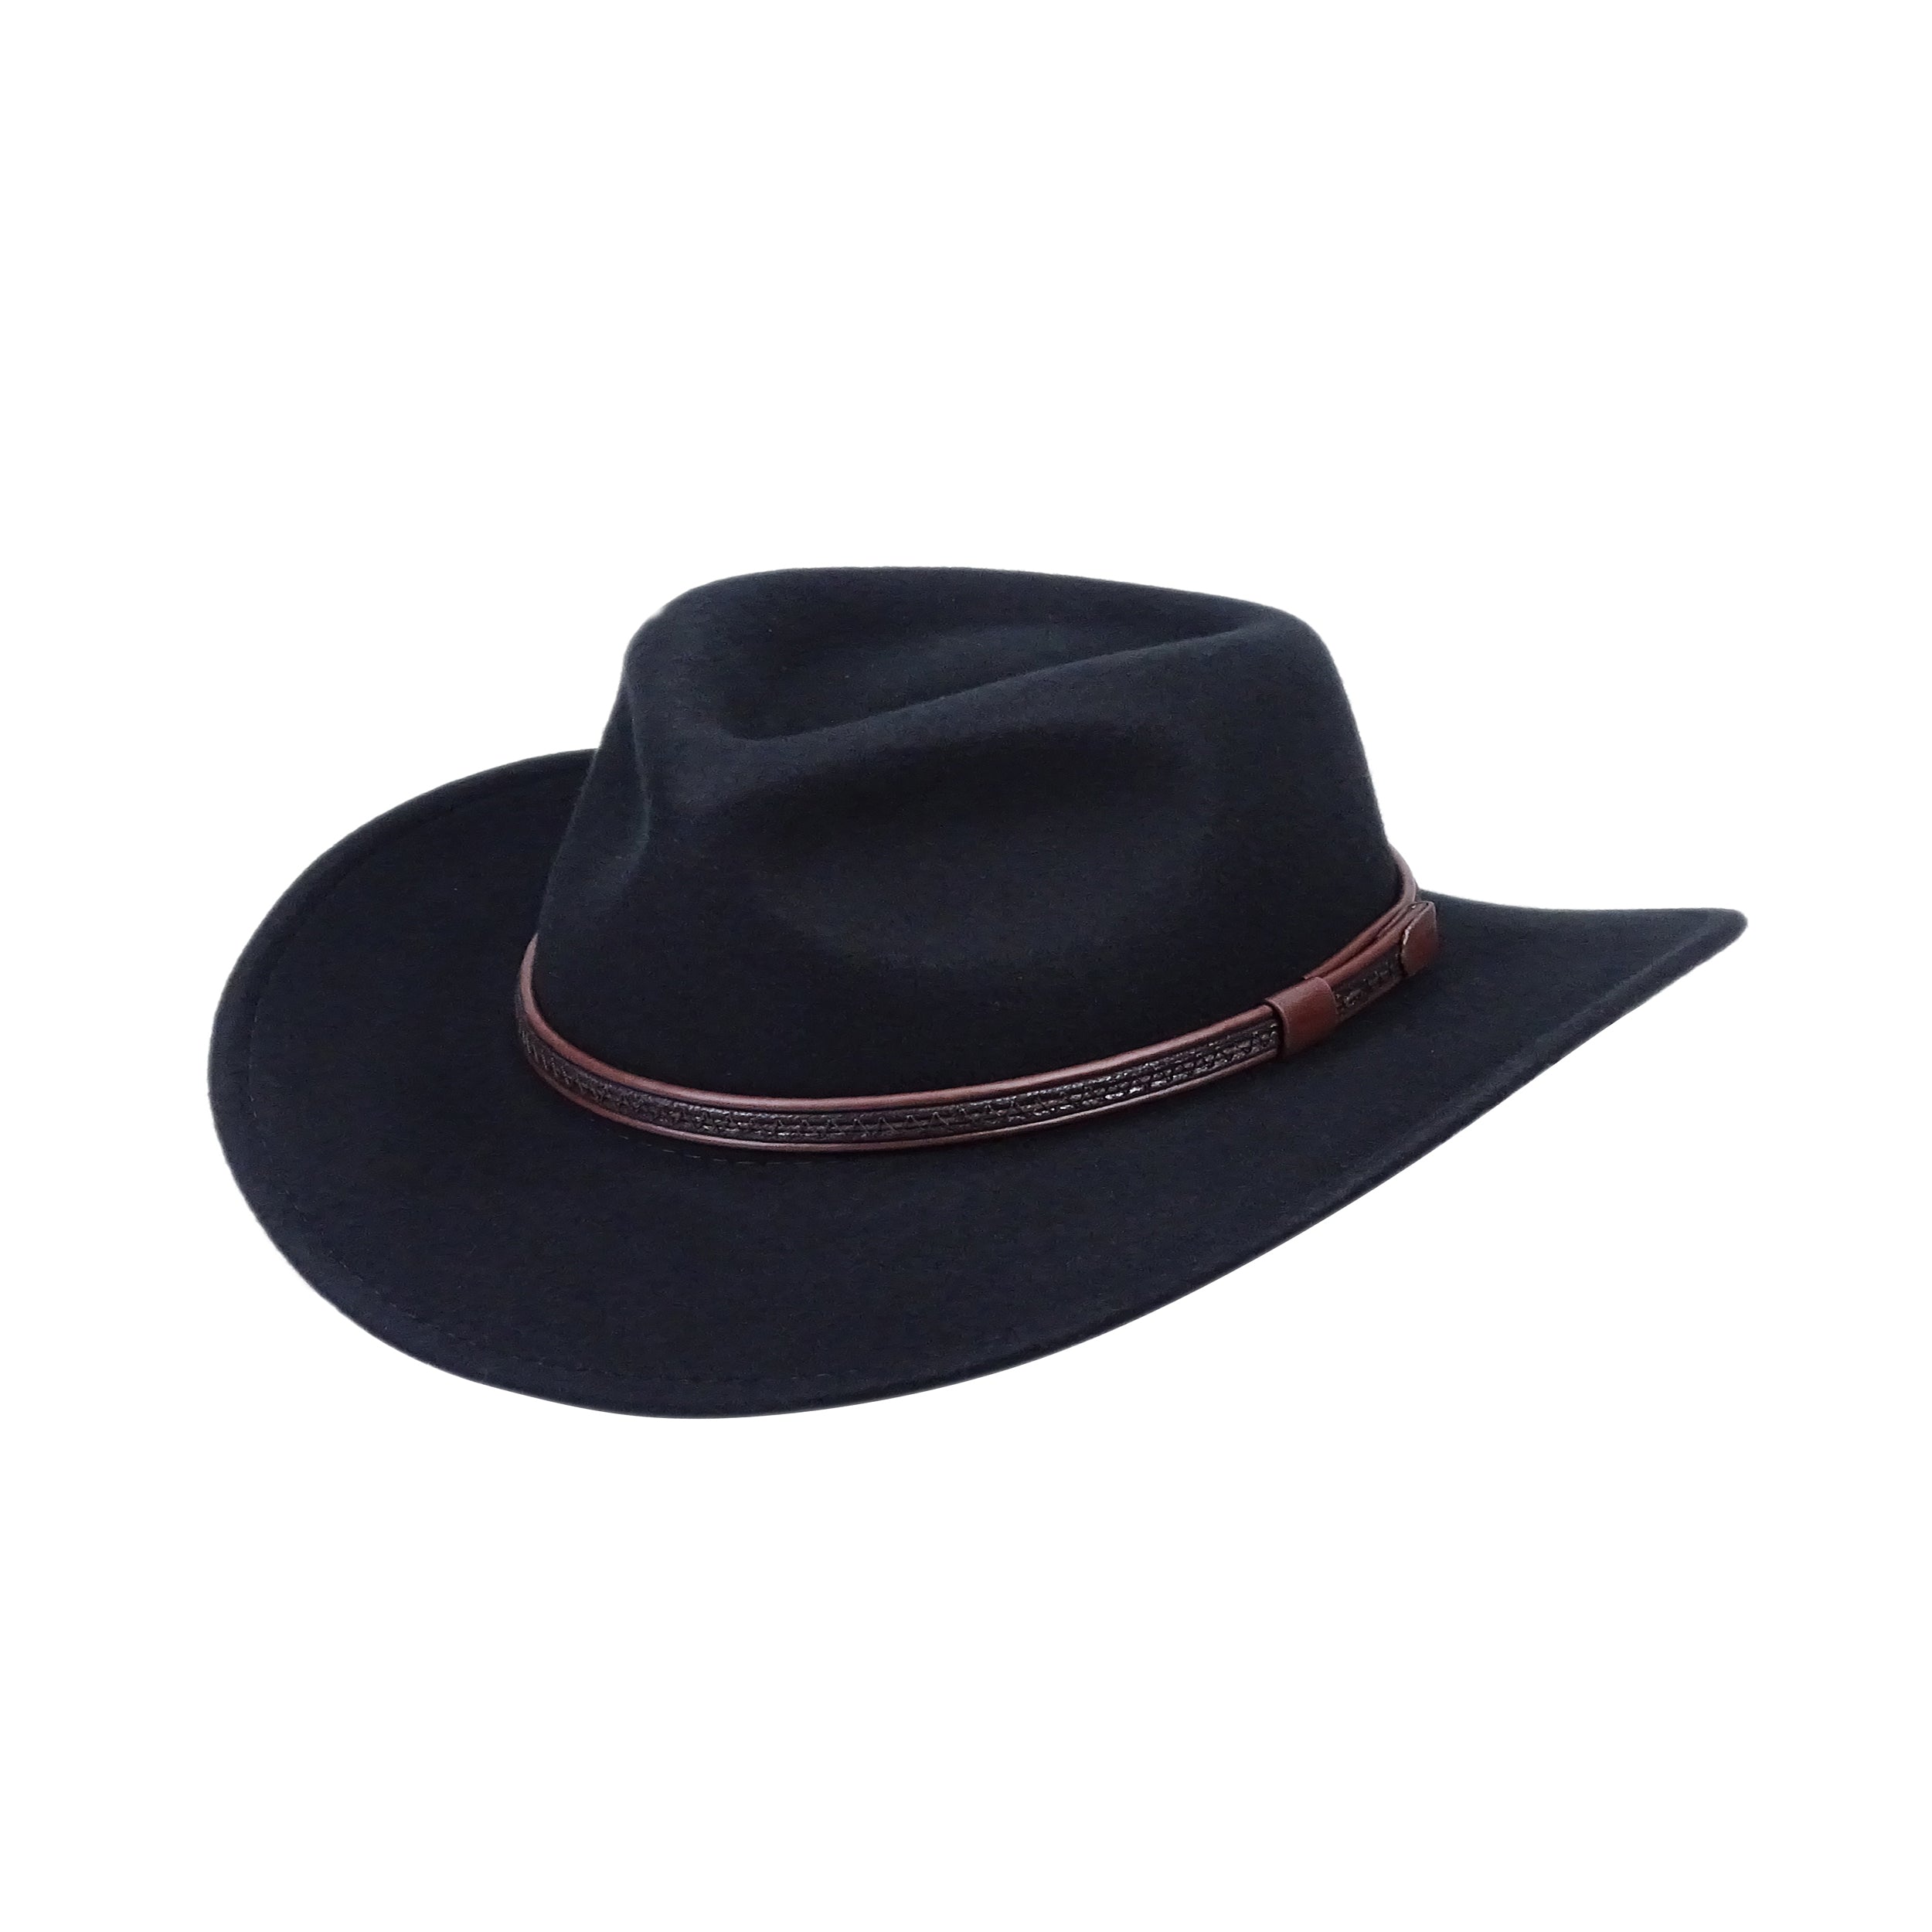 Silver Canyon Men’s Vail Wool Felt Water Repellent Crushable Outback Western Hat